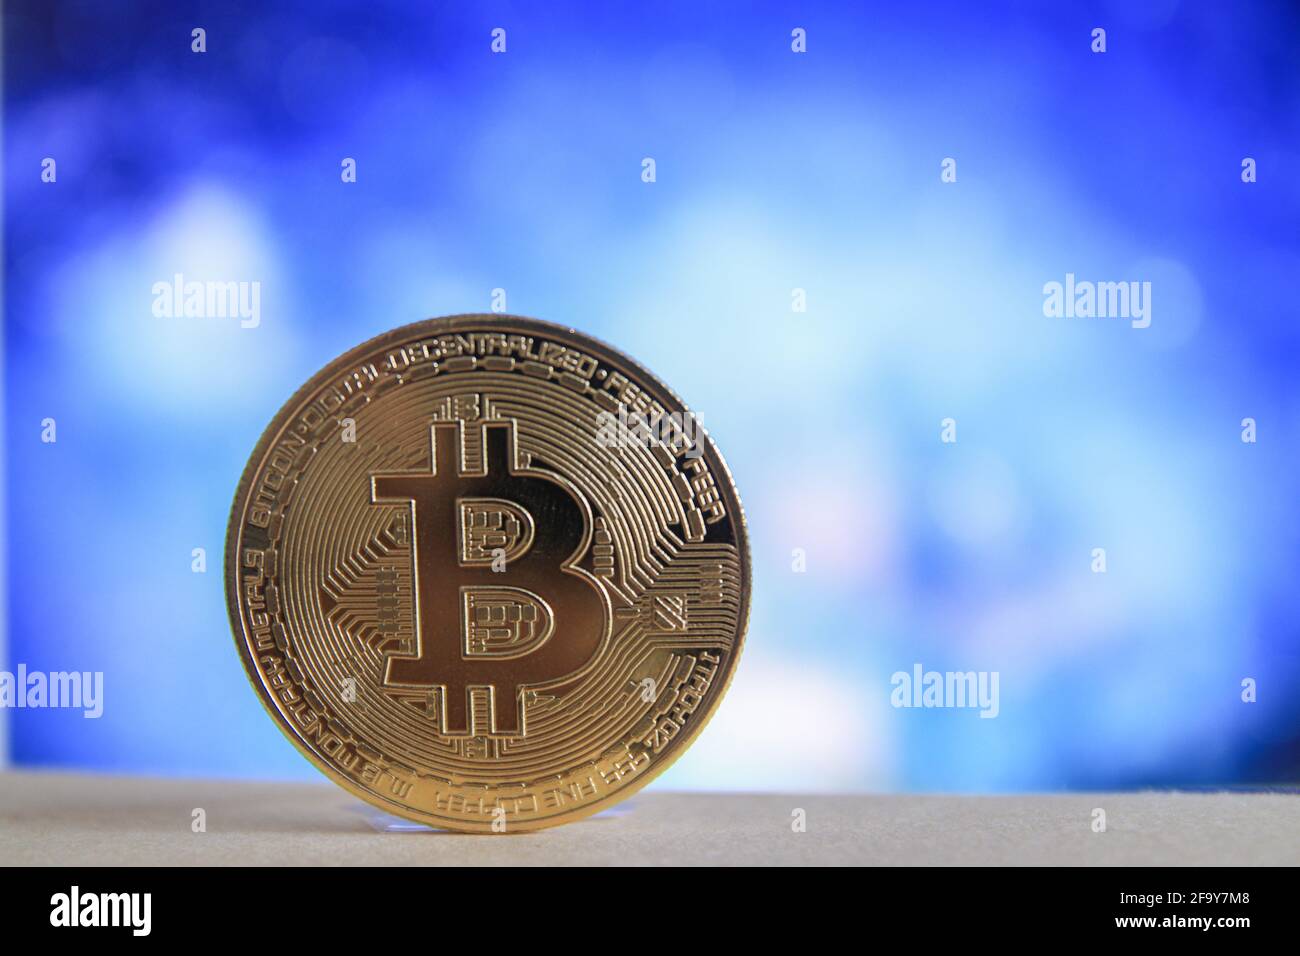 A physical version of Bitcoin BTC with blurred blue background. Stock Photo